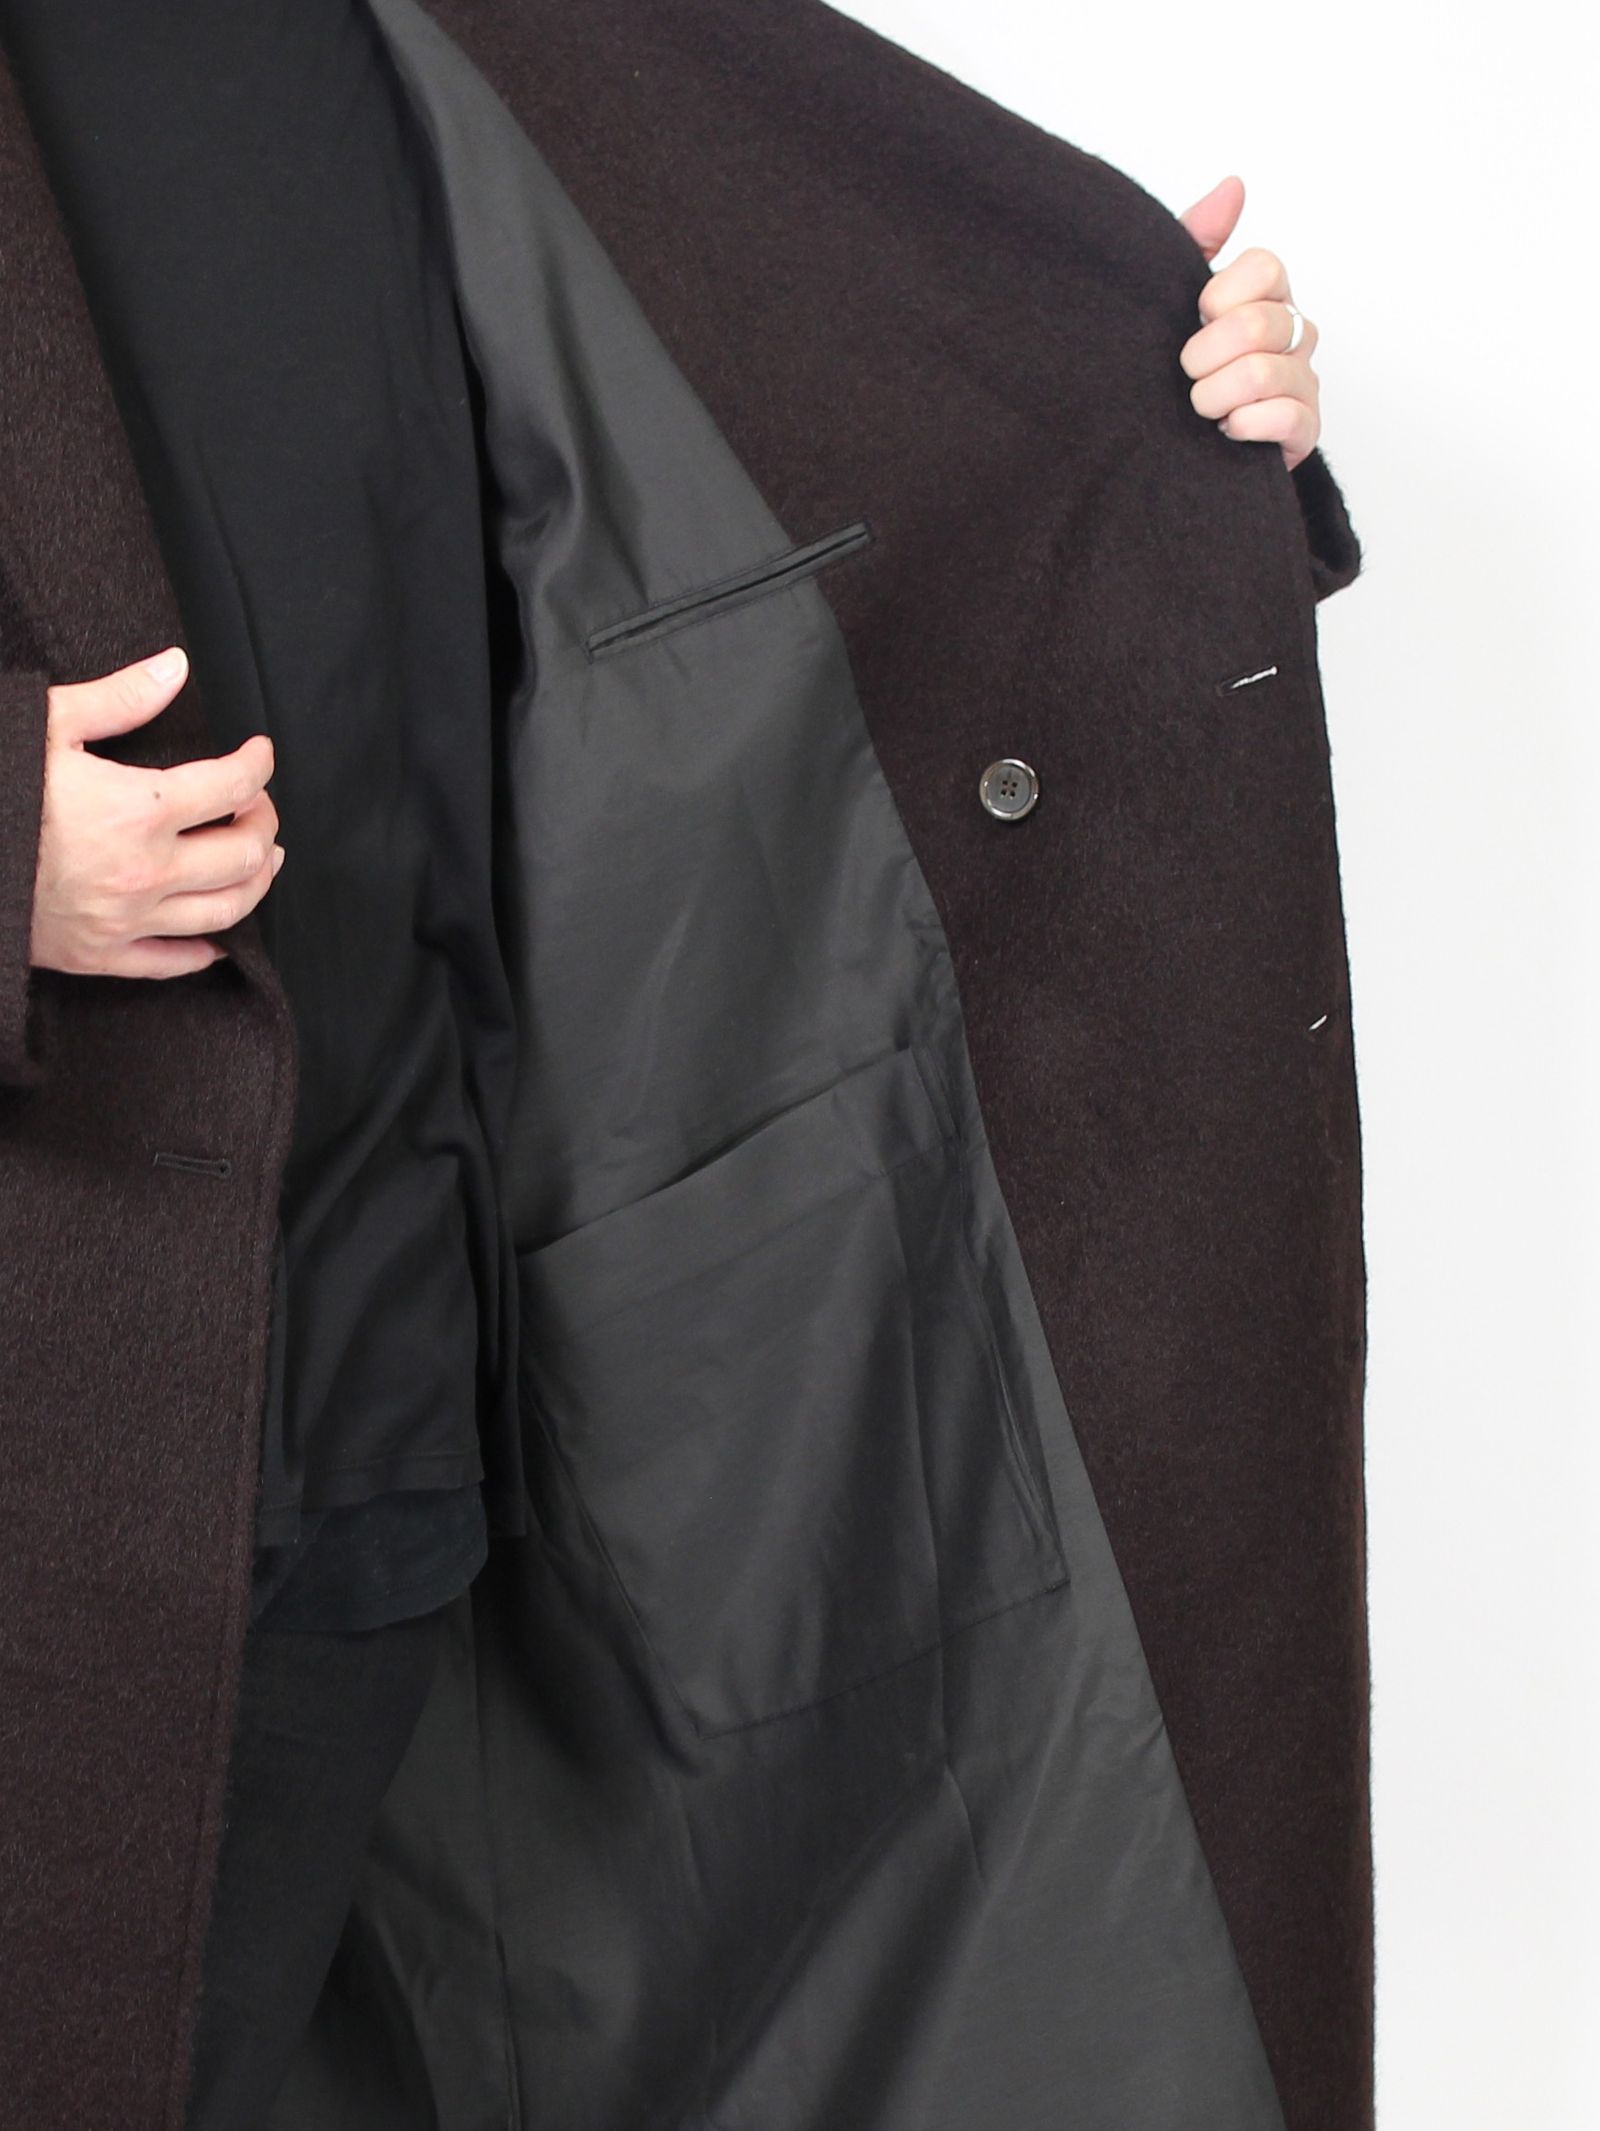 SEVEN BY SEVEN - ダブルチェスターコート - Double Chester coat ...